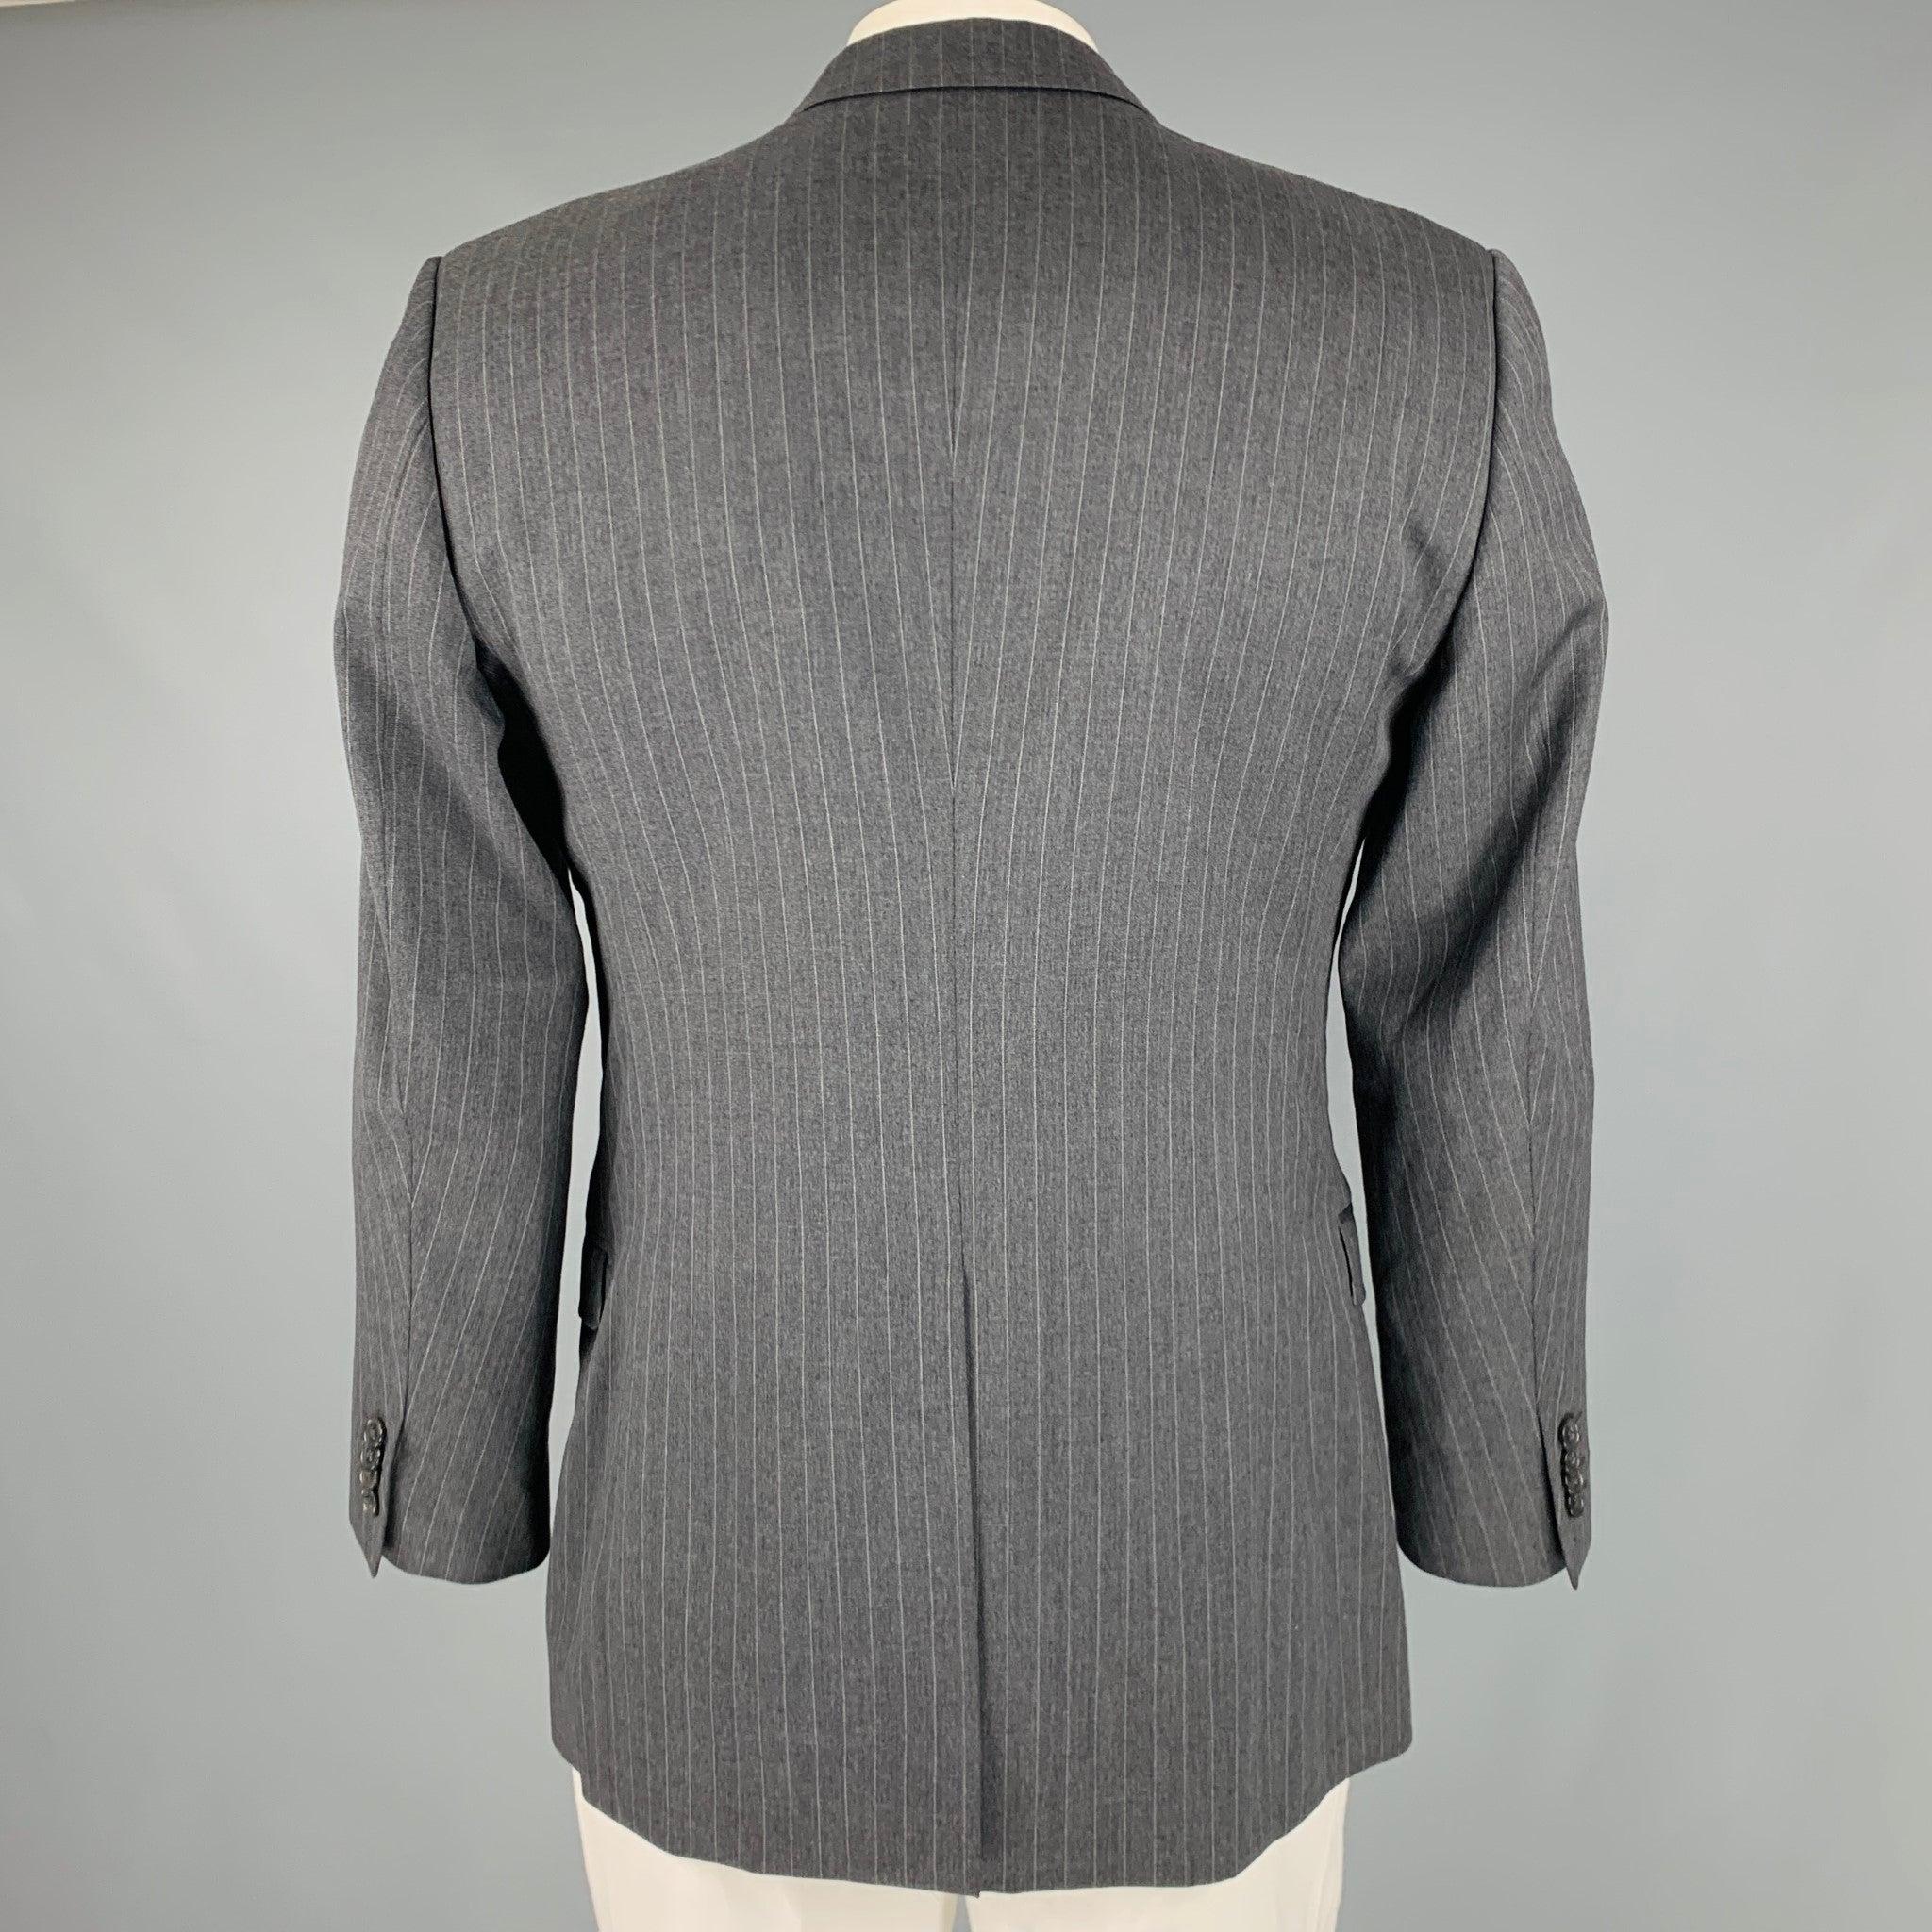 DOLCE & GABBANA Size 42 Grey White Pinstripe Virgin Wool Sport Coat In Excellent Condition For Sale In San Francisco, CA